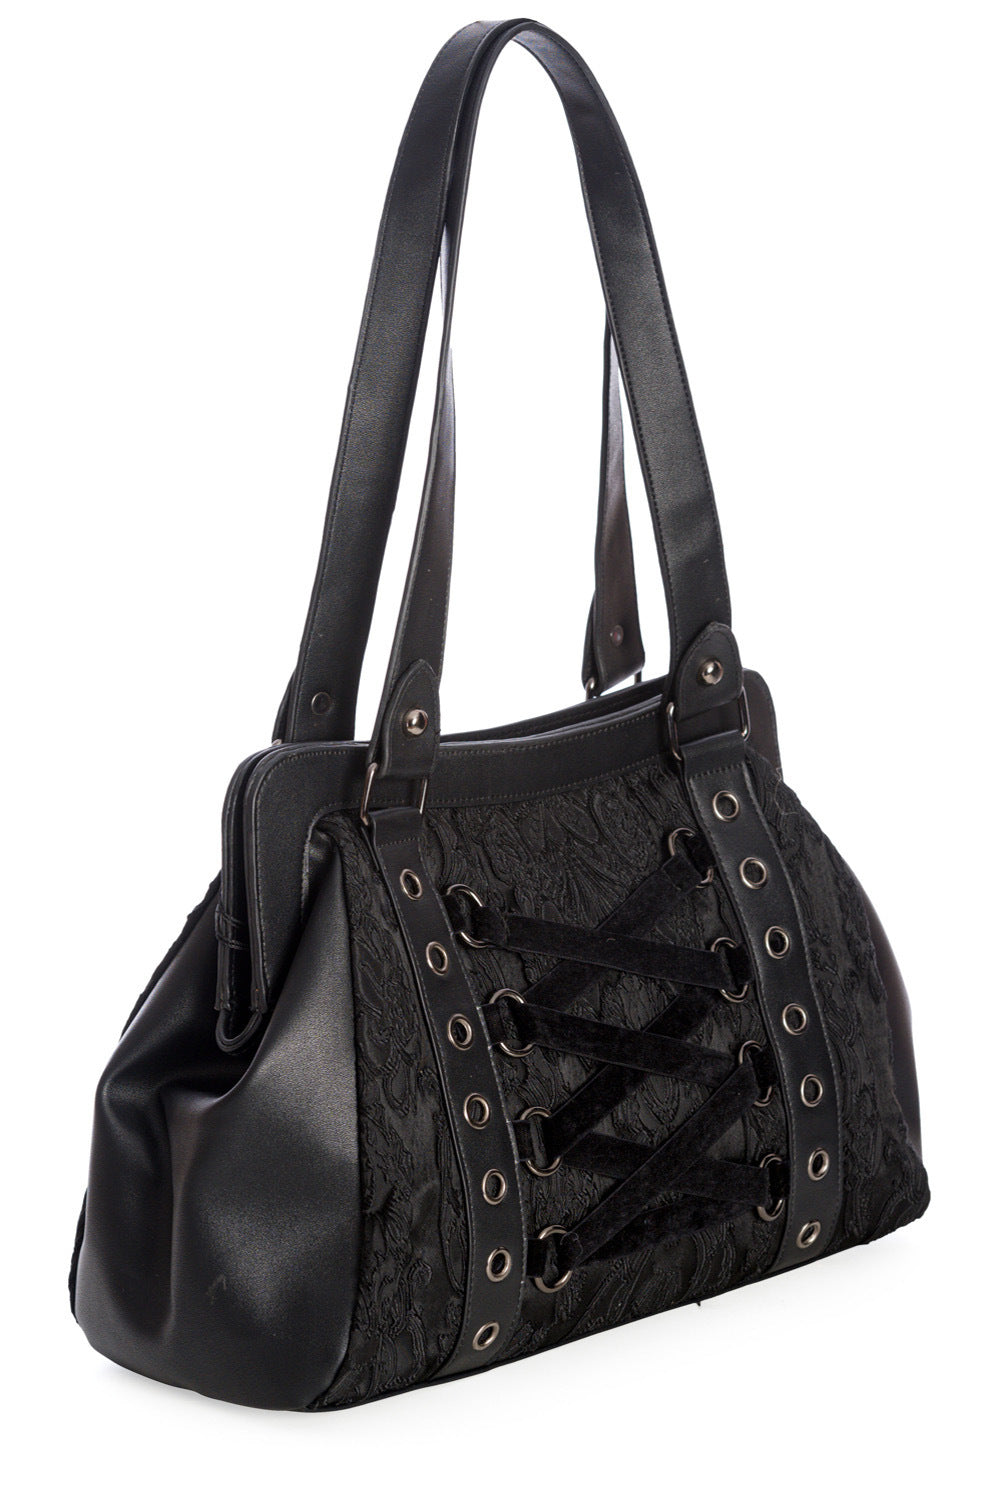 Black over the shoulder handbag in black with black lace details and corset feature to front.